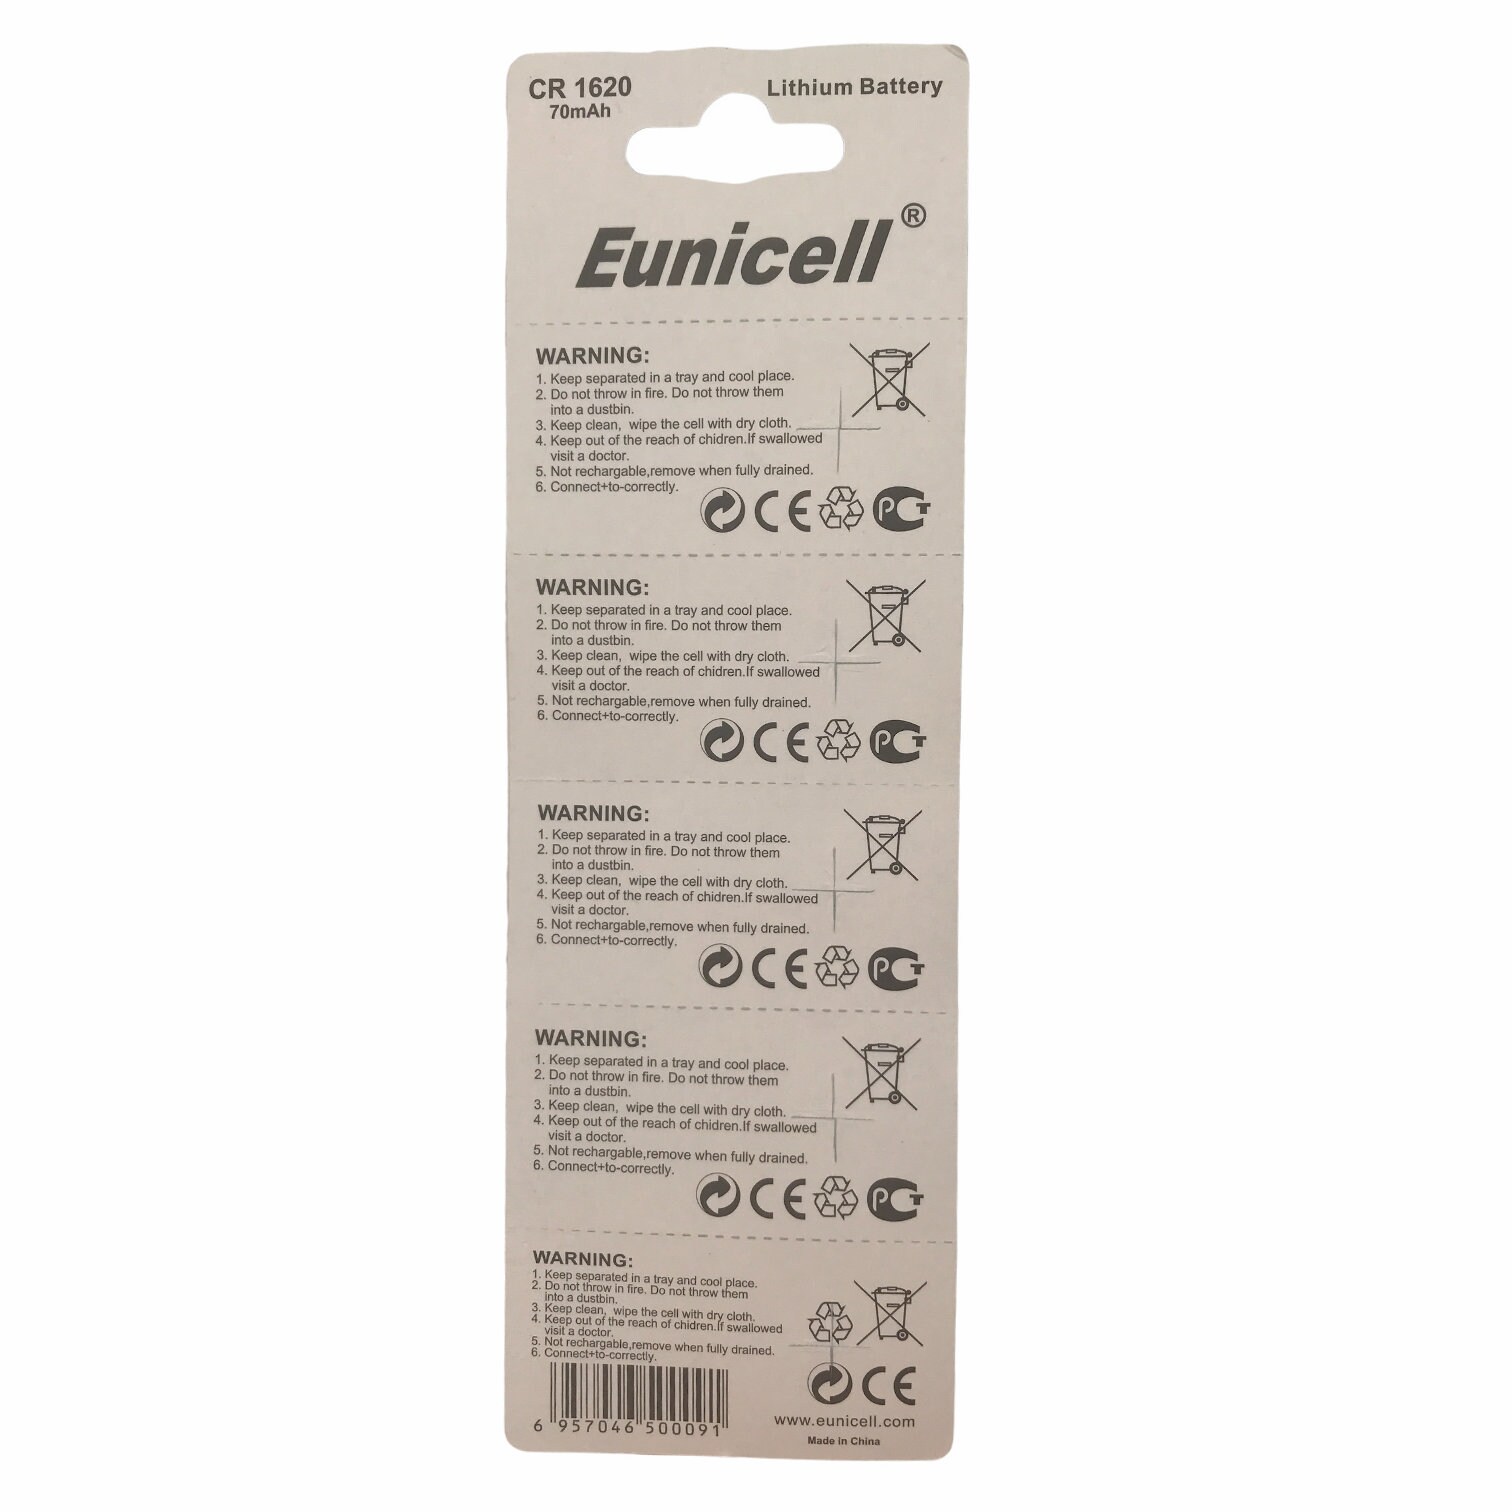 5 Pcs Eunicell CR-1620 3V Lithium Coin Cell Battery